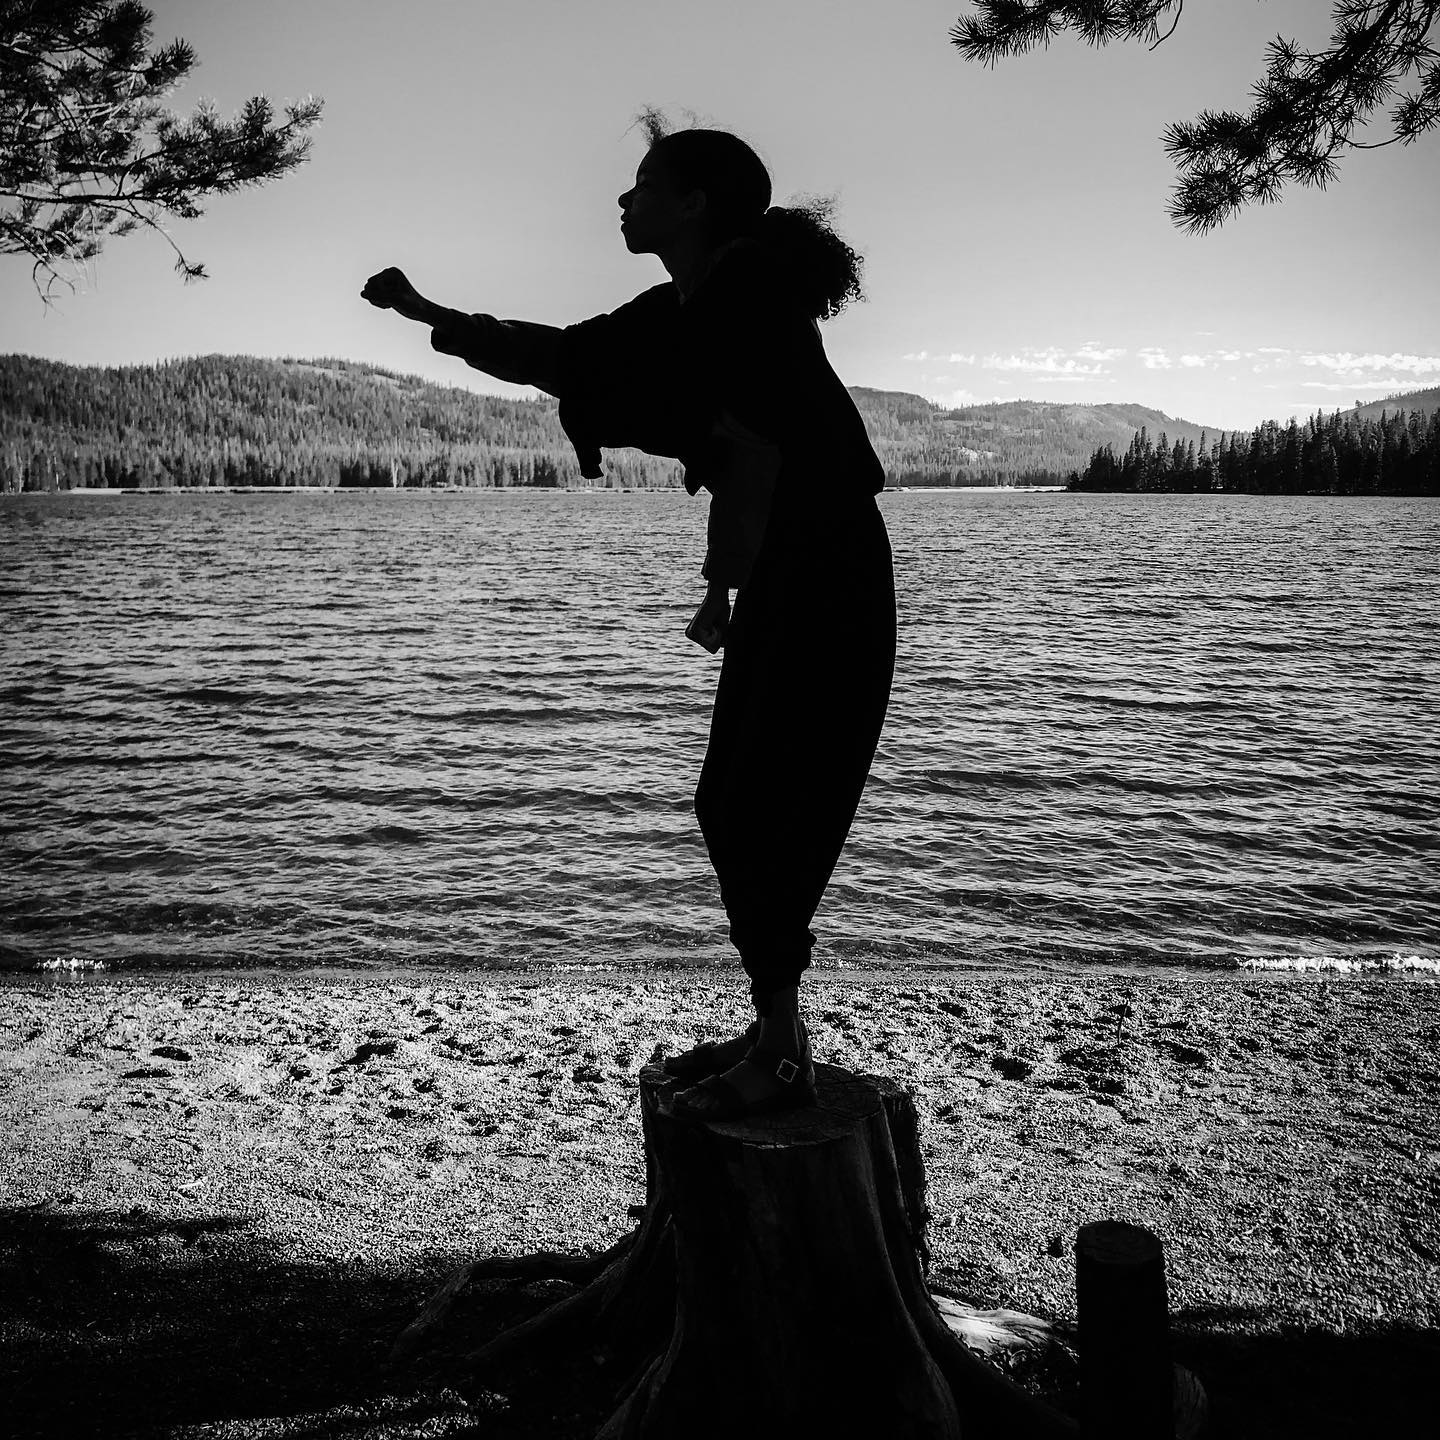 A dancer stands on the edge of a lake dancing, in black and white.